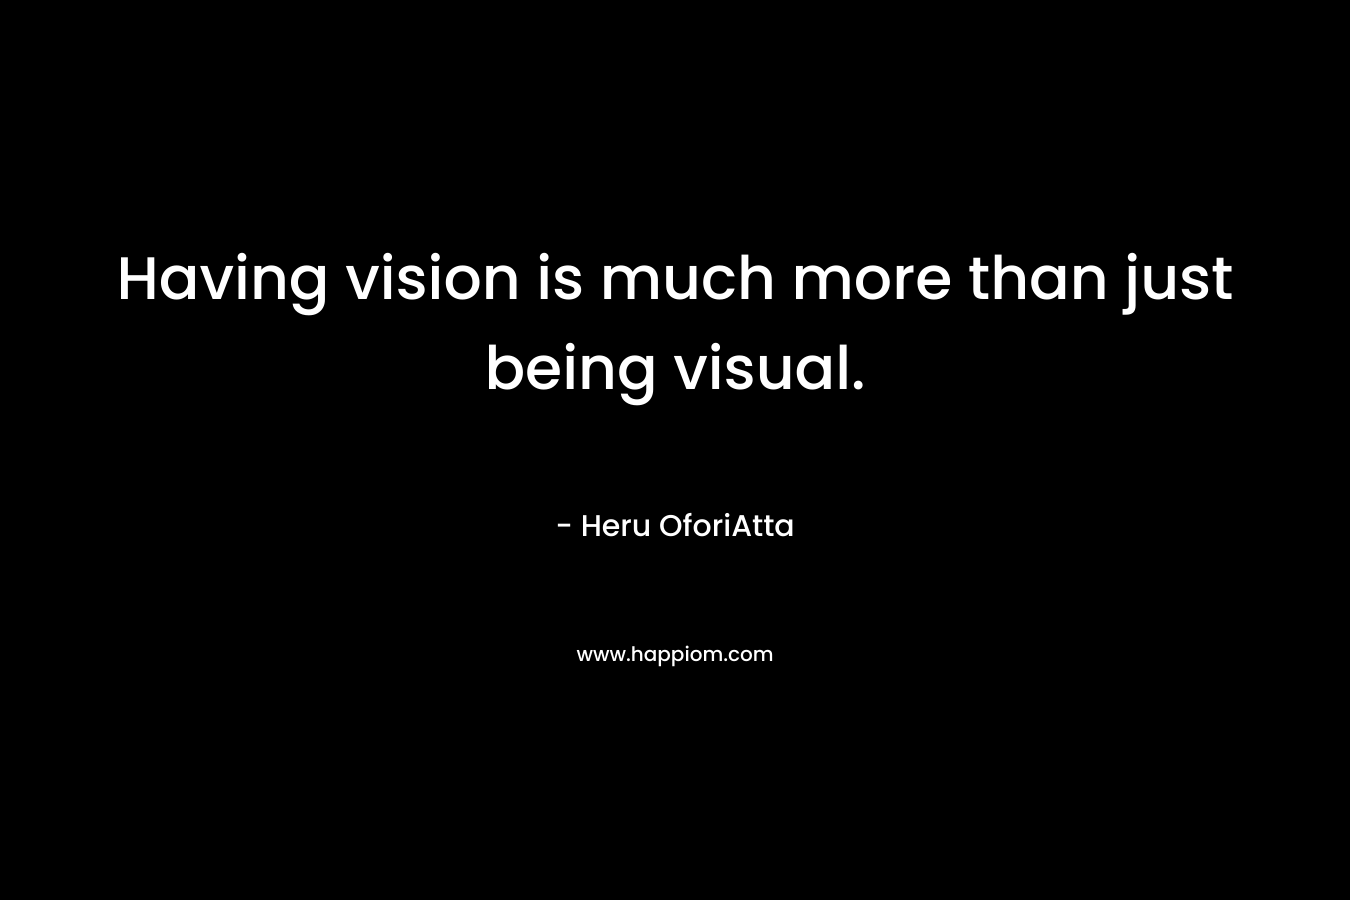 Having vision is much more than just being visual.